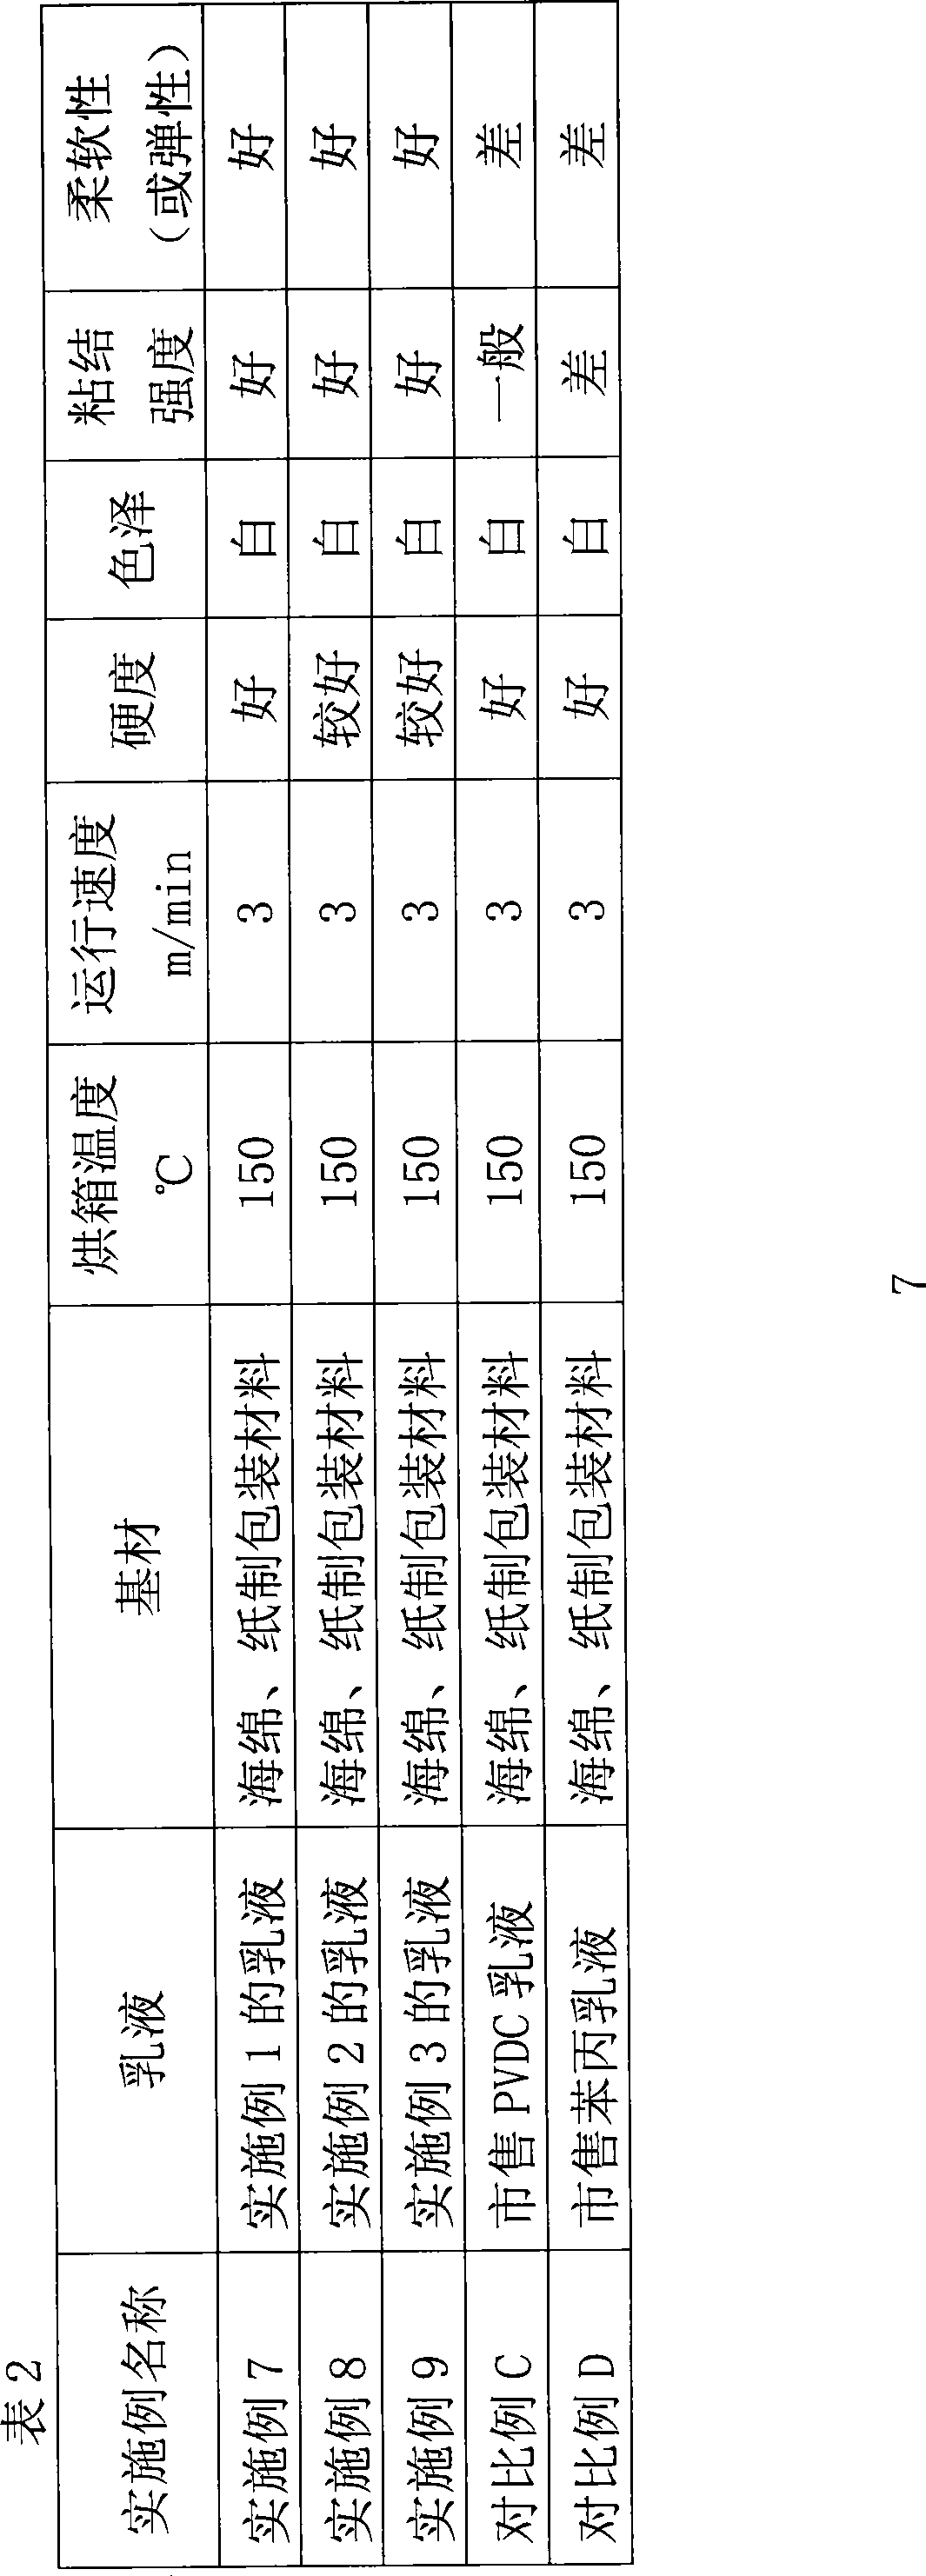 PVDC copolymerization emulsion, preparation and uses thereof